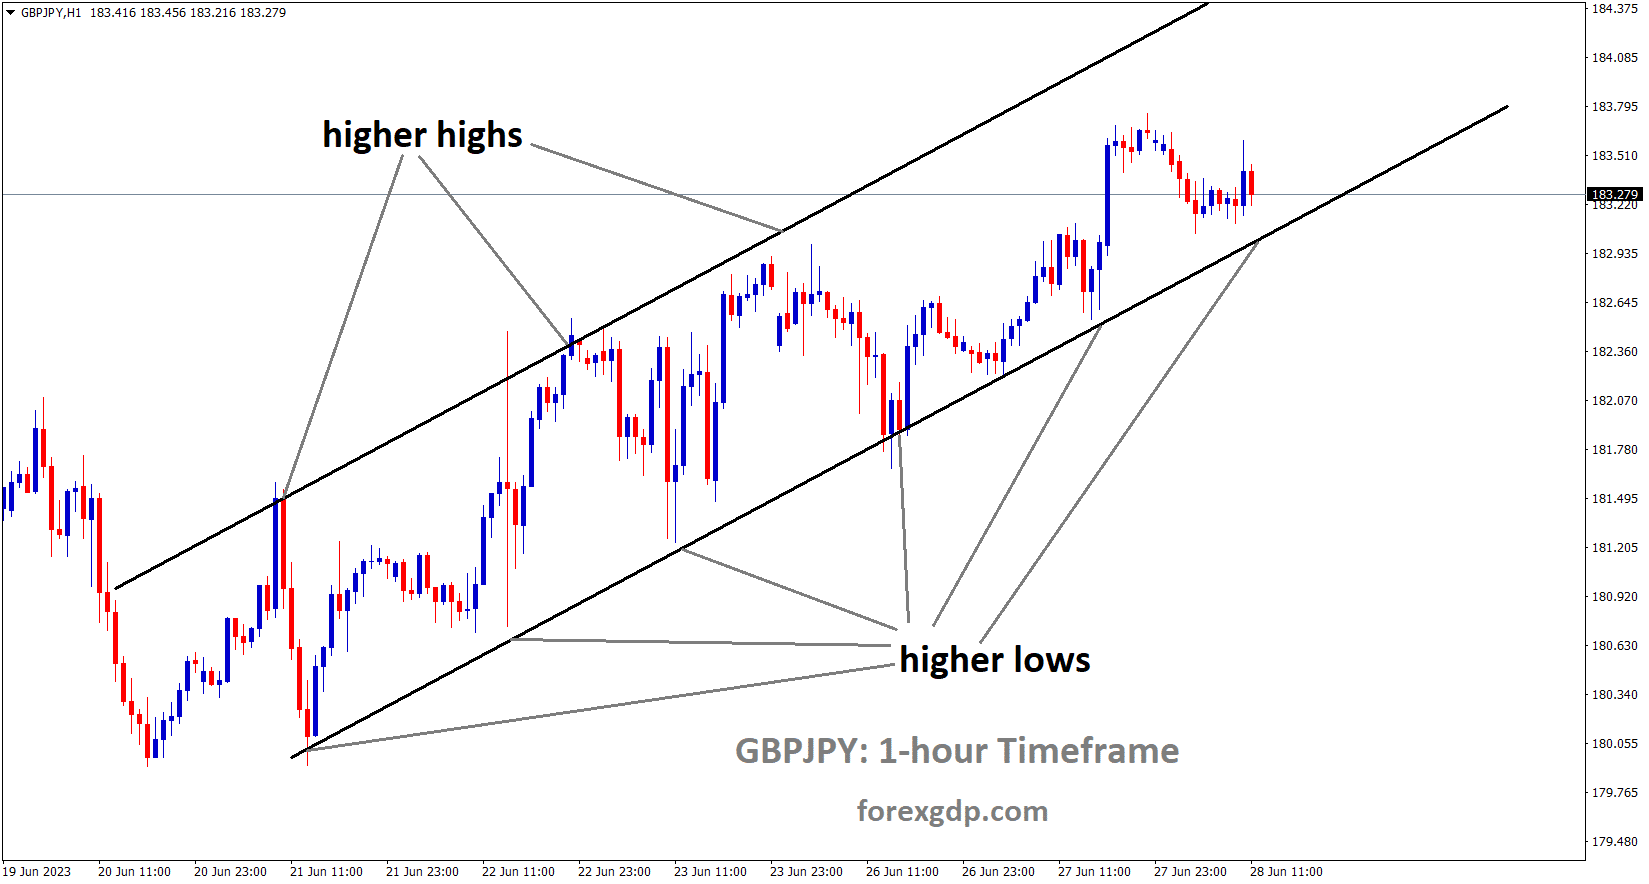 GBPJPY is moving in an Ascending channel and the market has reached the higher low area of the channel 1